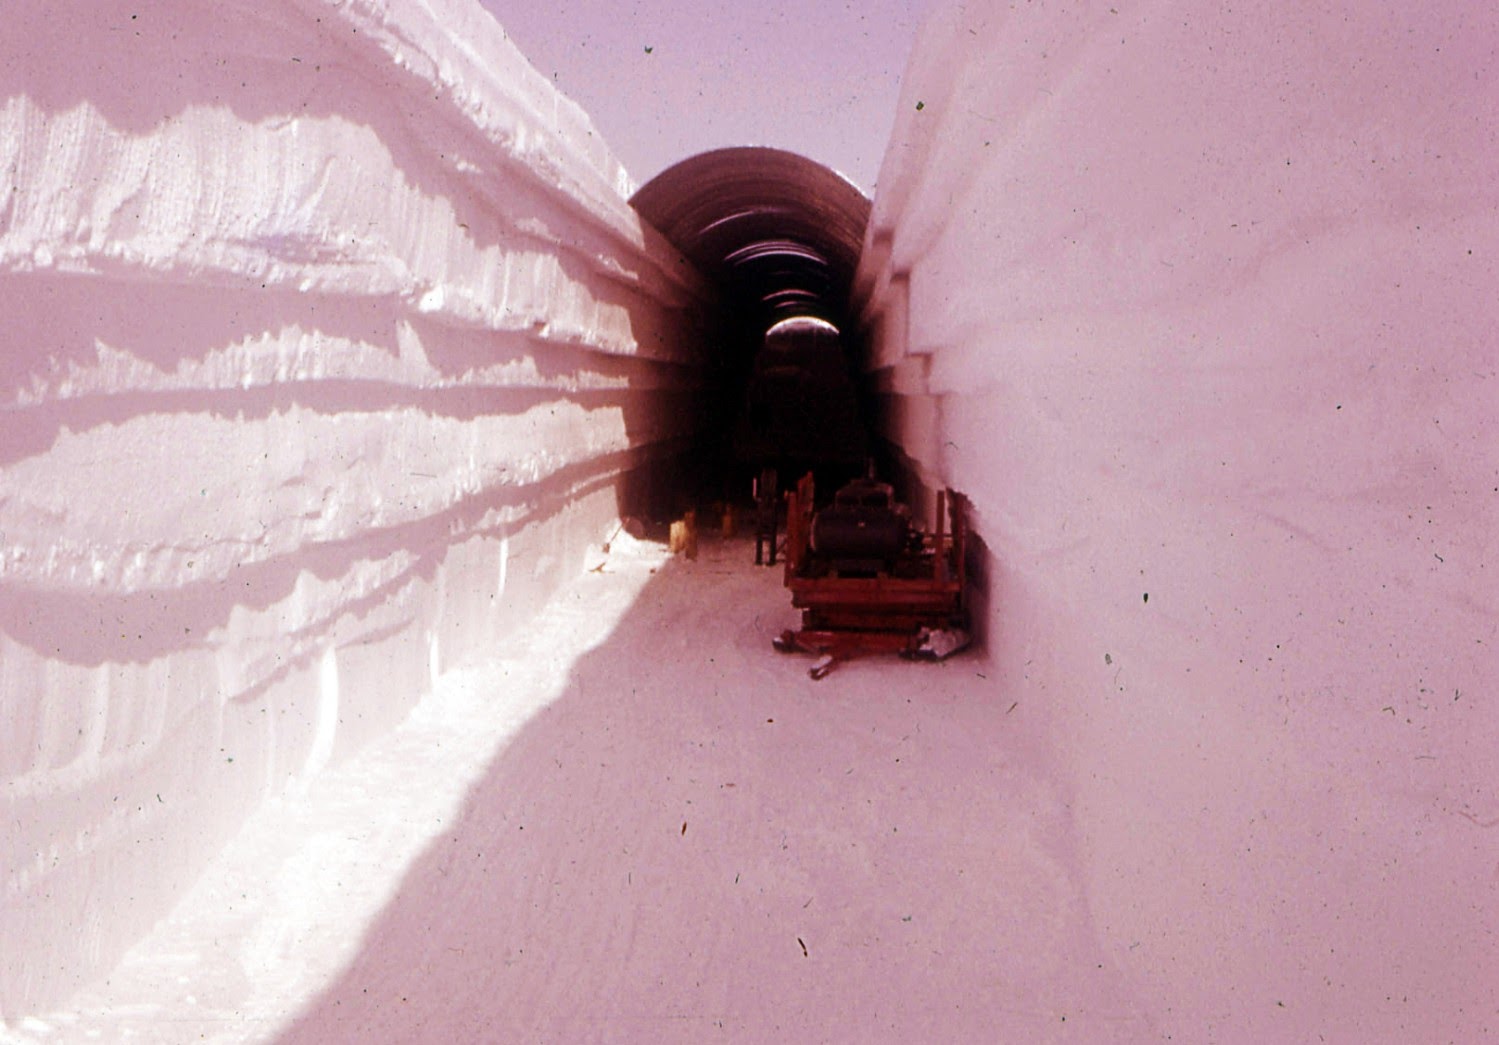 Project Iceworm snow tunnels